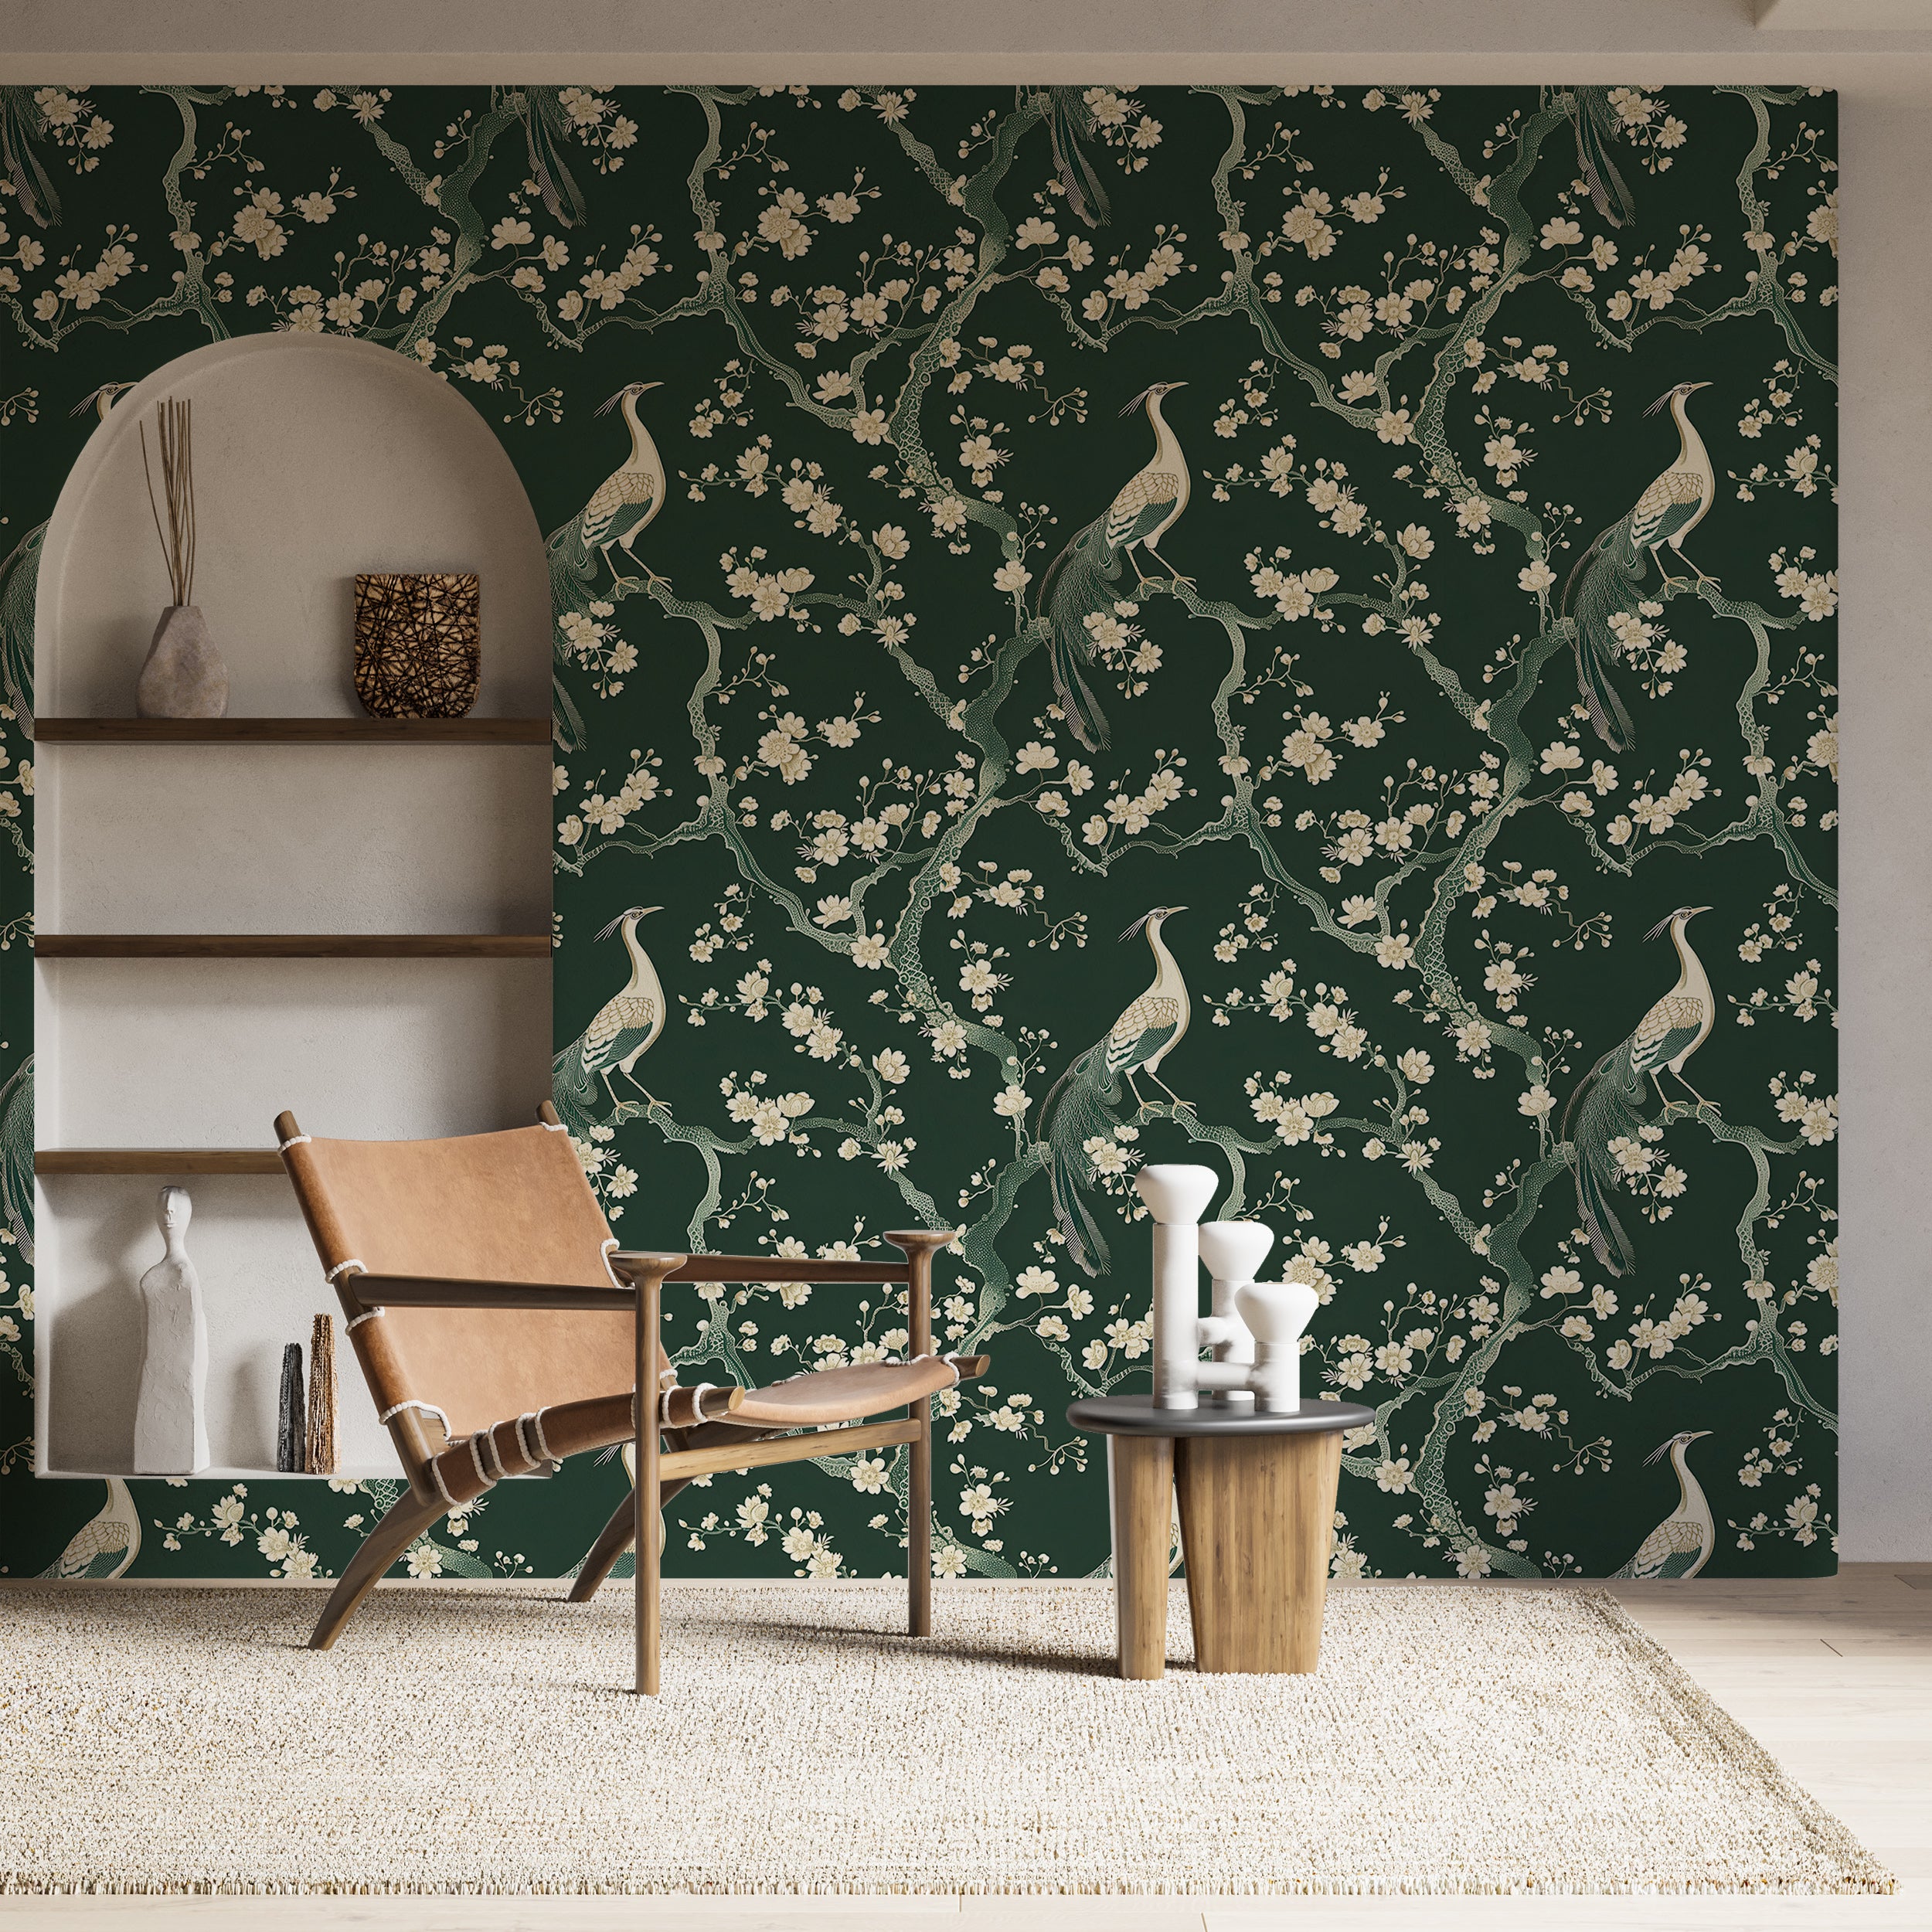 Timeless chinoiserie floral wallpaper